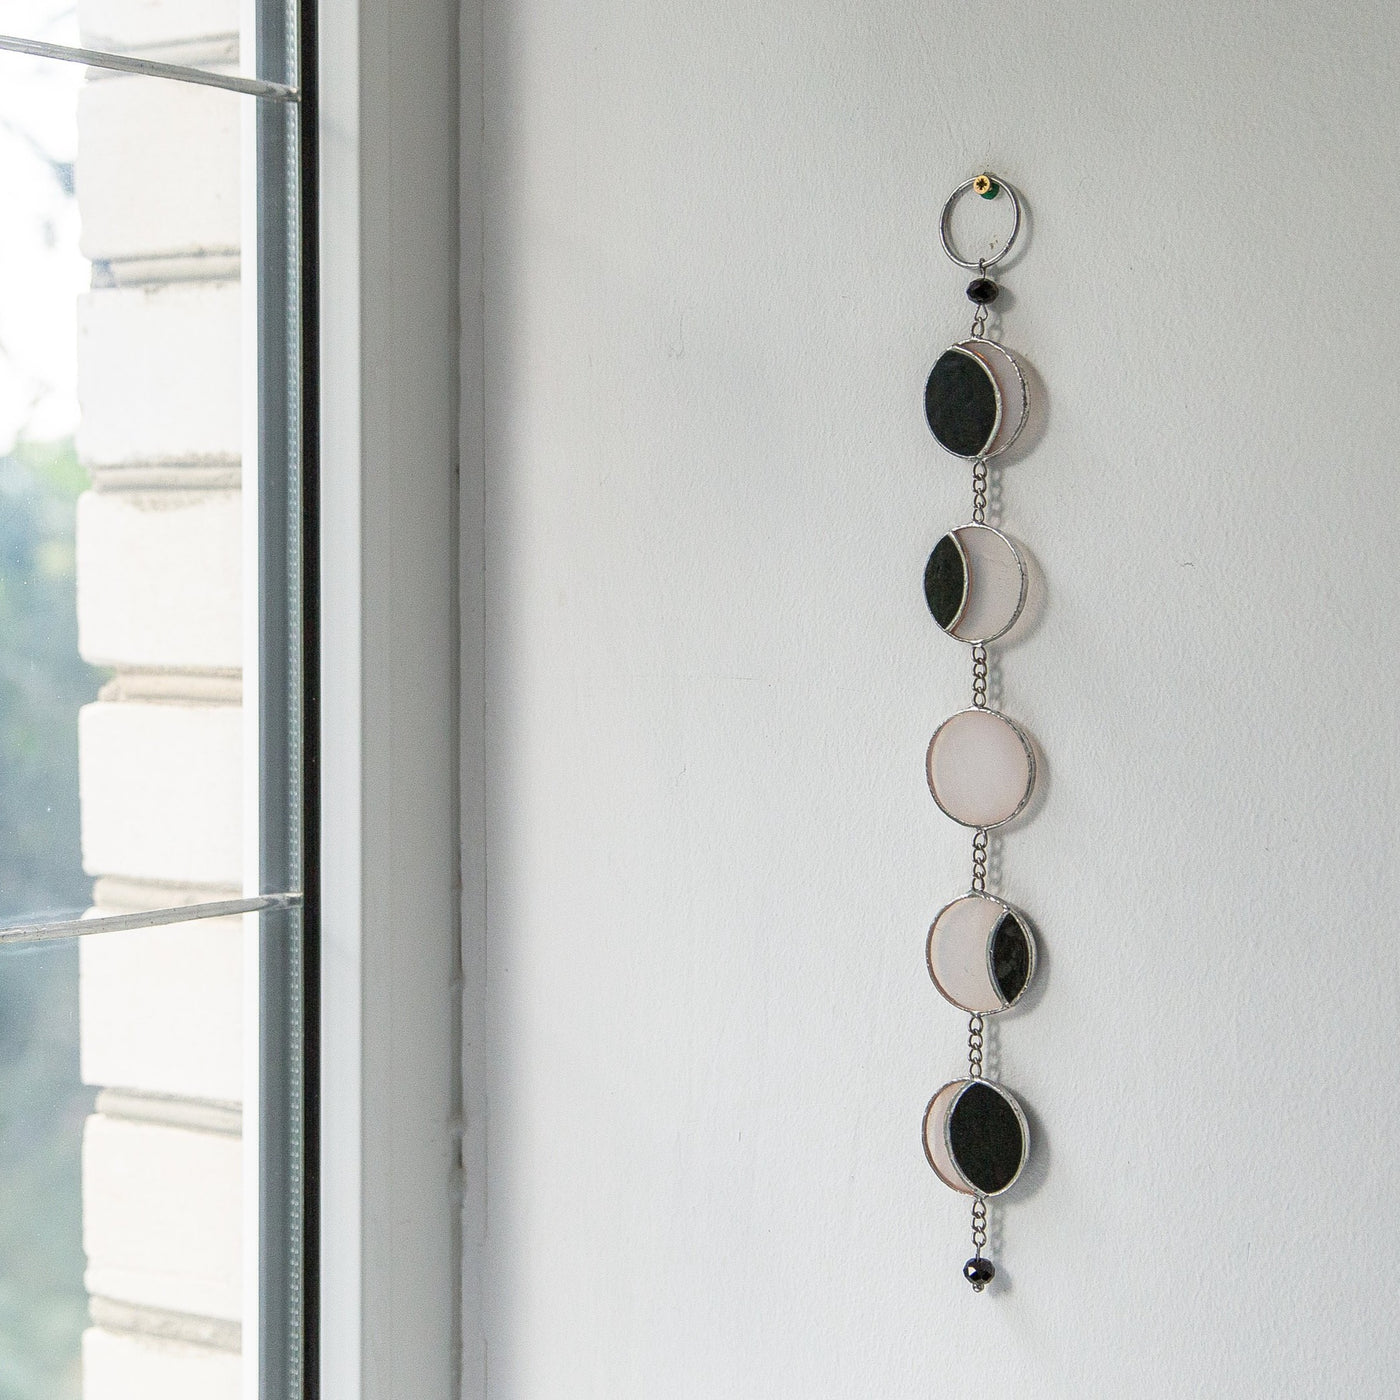 Stained glass moon phases suncatcher as a wall hanging